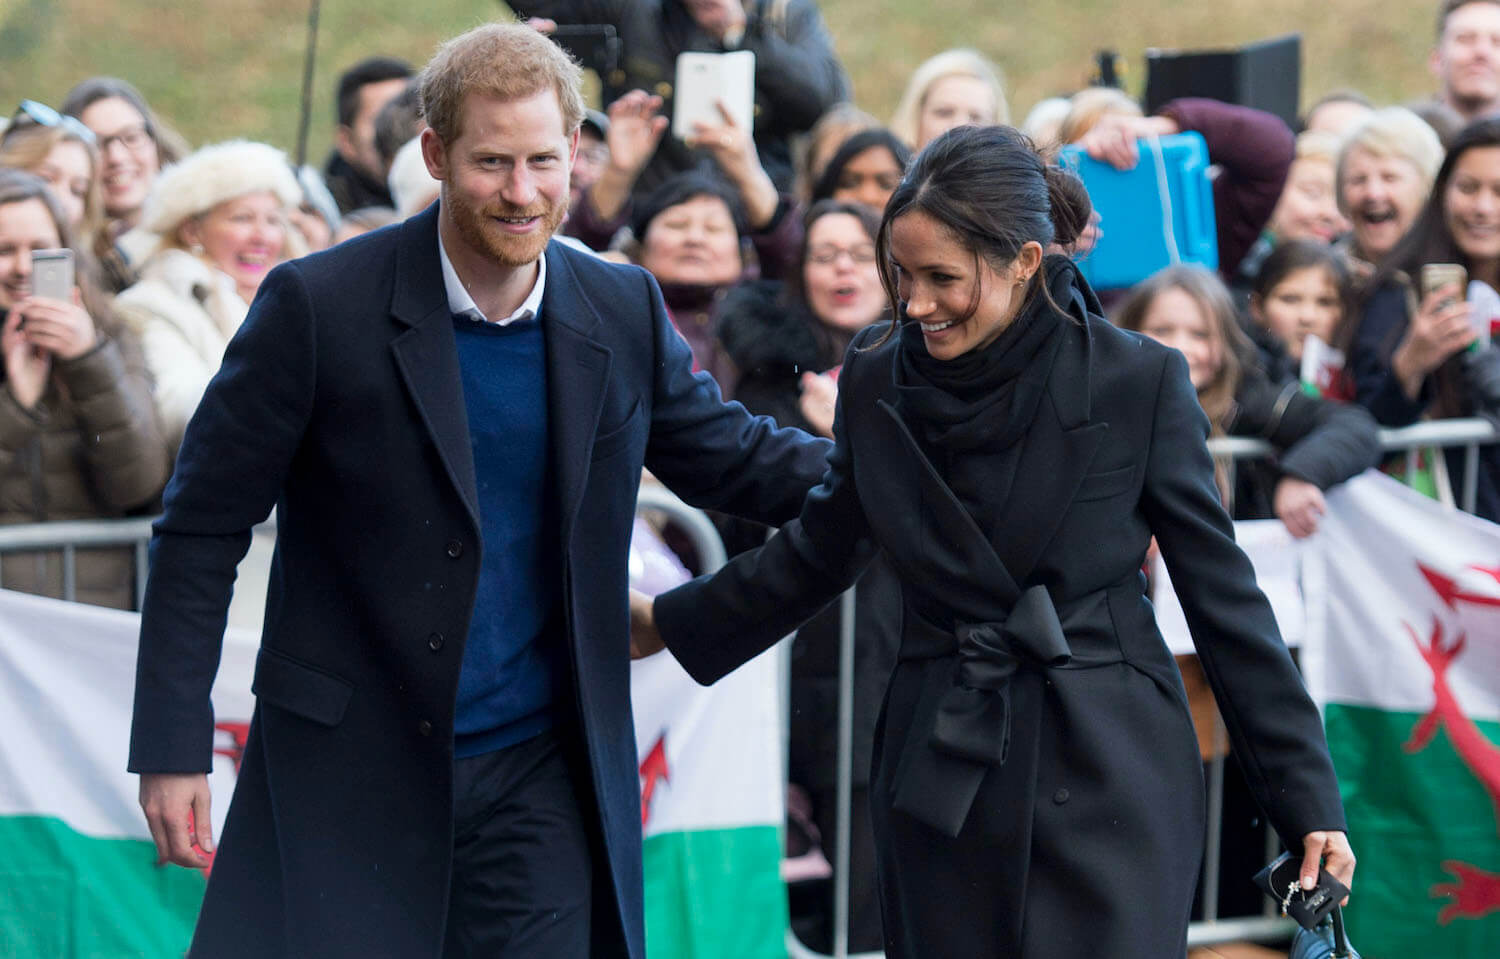 Meghan Markle provided reciprocal body language that sent a strong message to Prince Harry